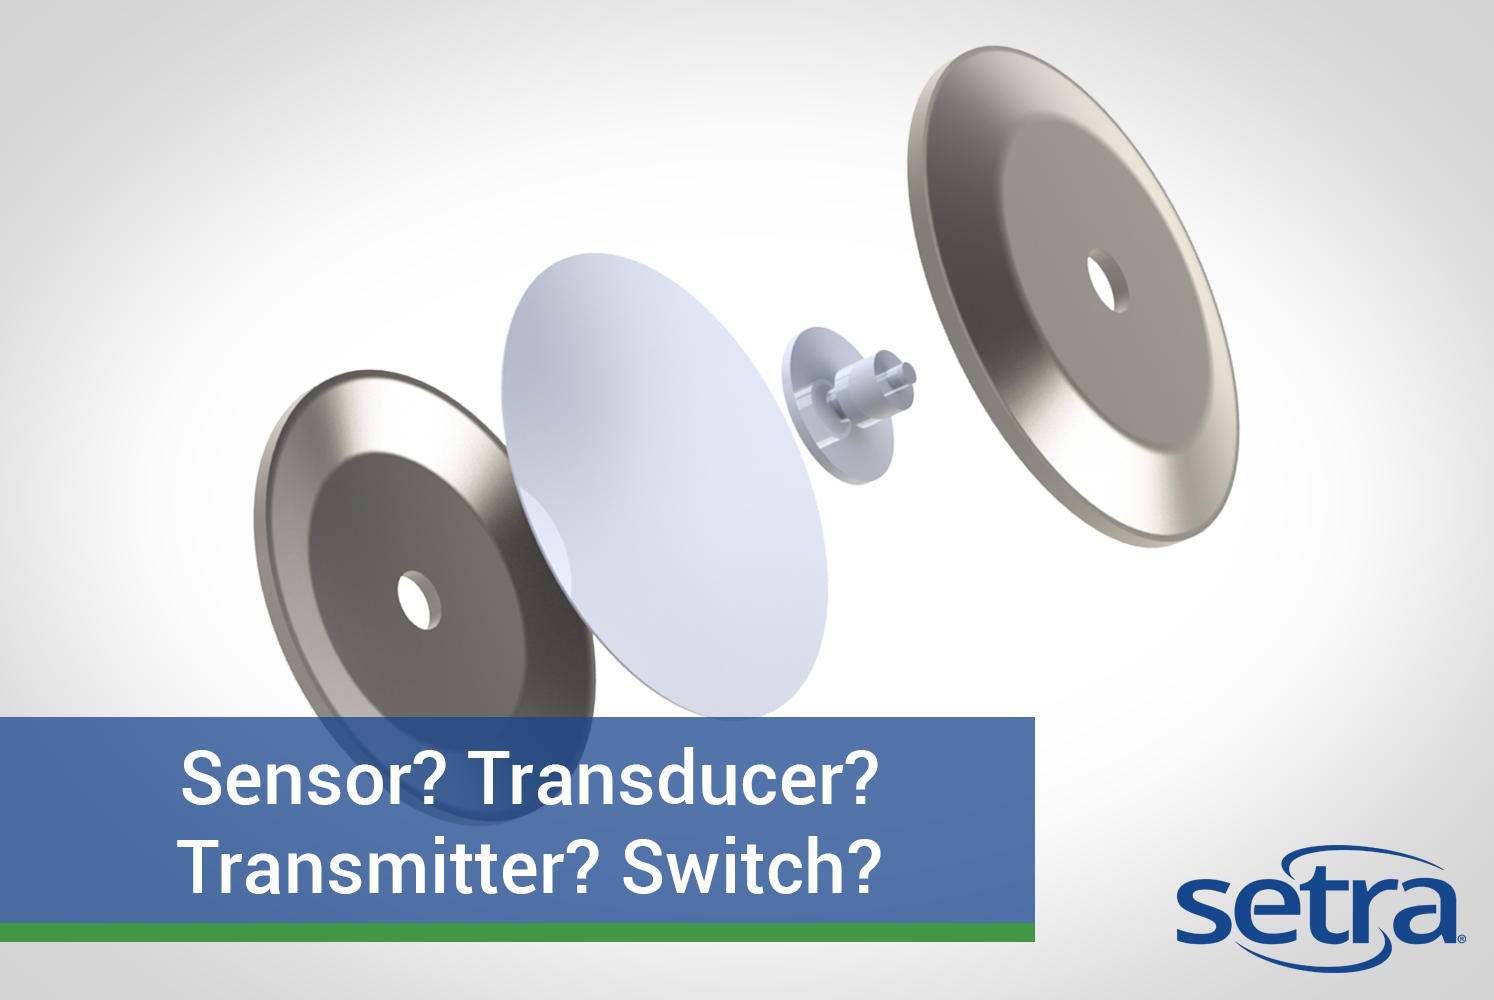 What is the difference between a pressure sensor, transducer, transmitter, and switch?